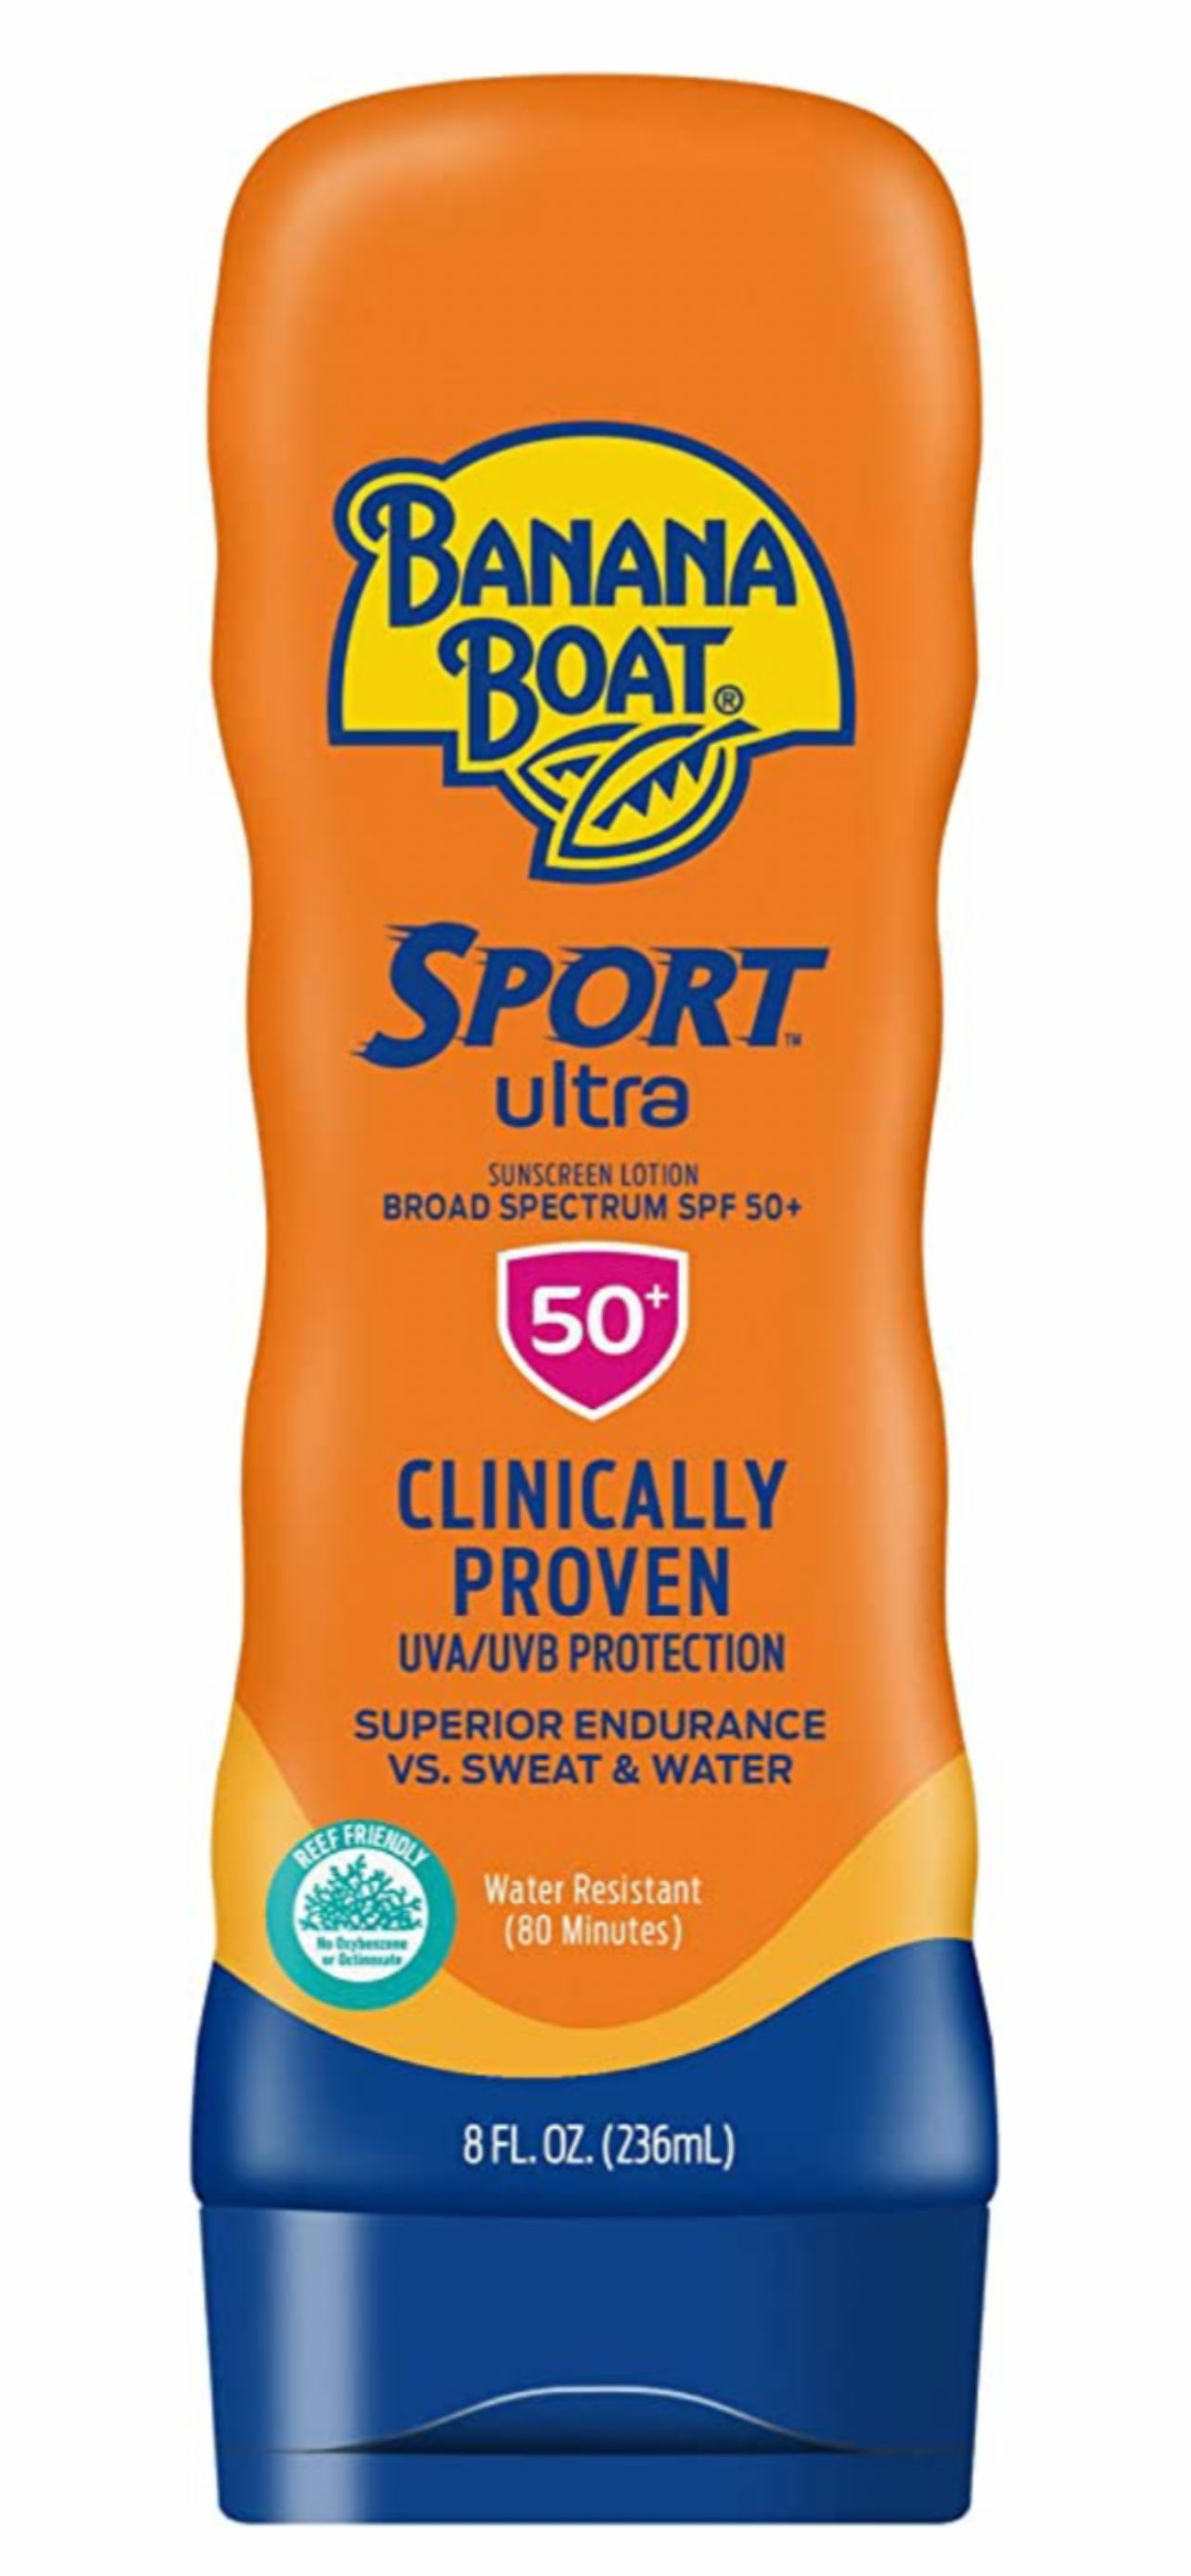 Banana Boat Sport Ultra SPF 50 Sunscreen Lotion 8oz Oxybenzone Free Sunscreen, Sunblock Lotion, Water Resistant - Supporting ORCRF.org